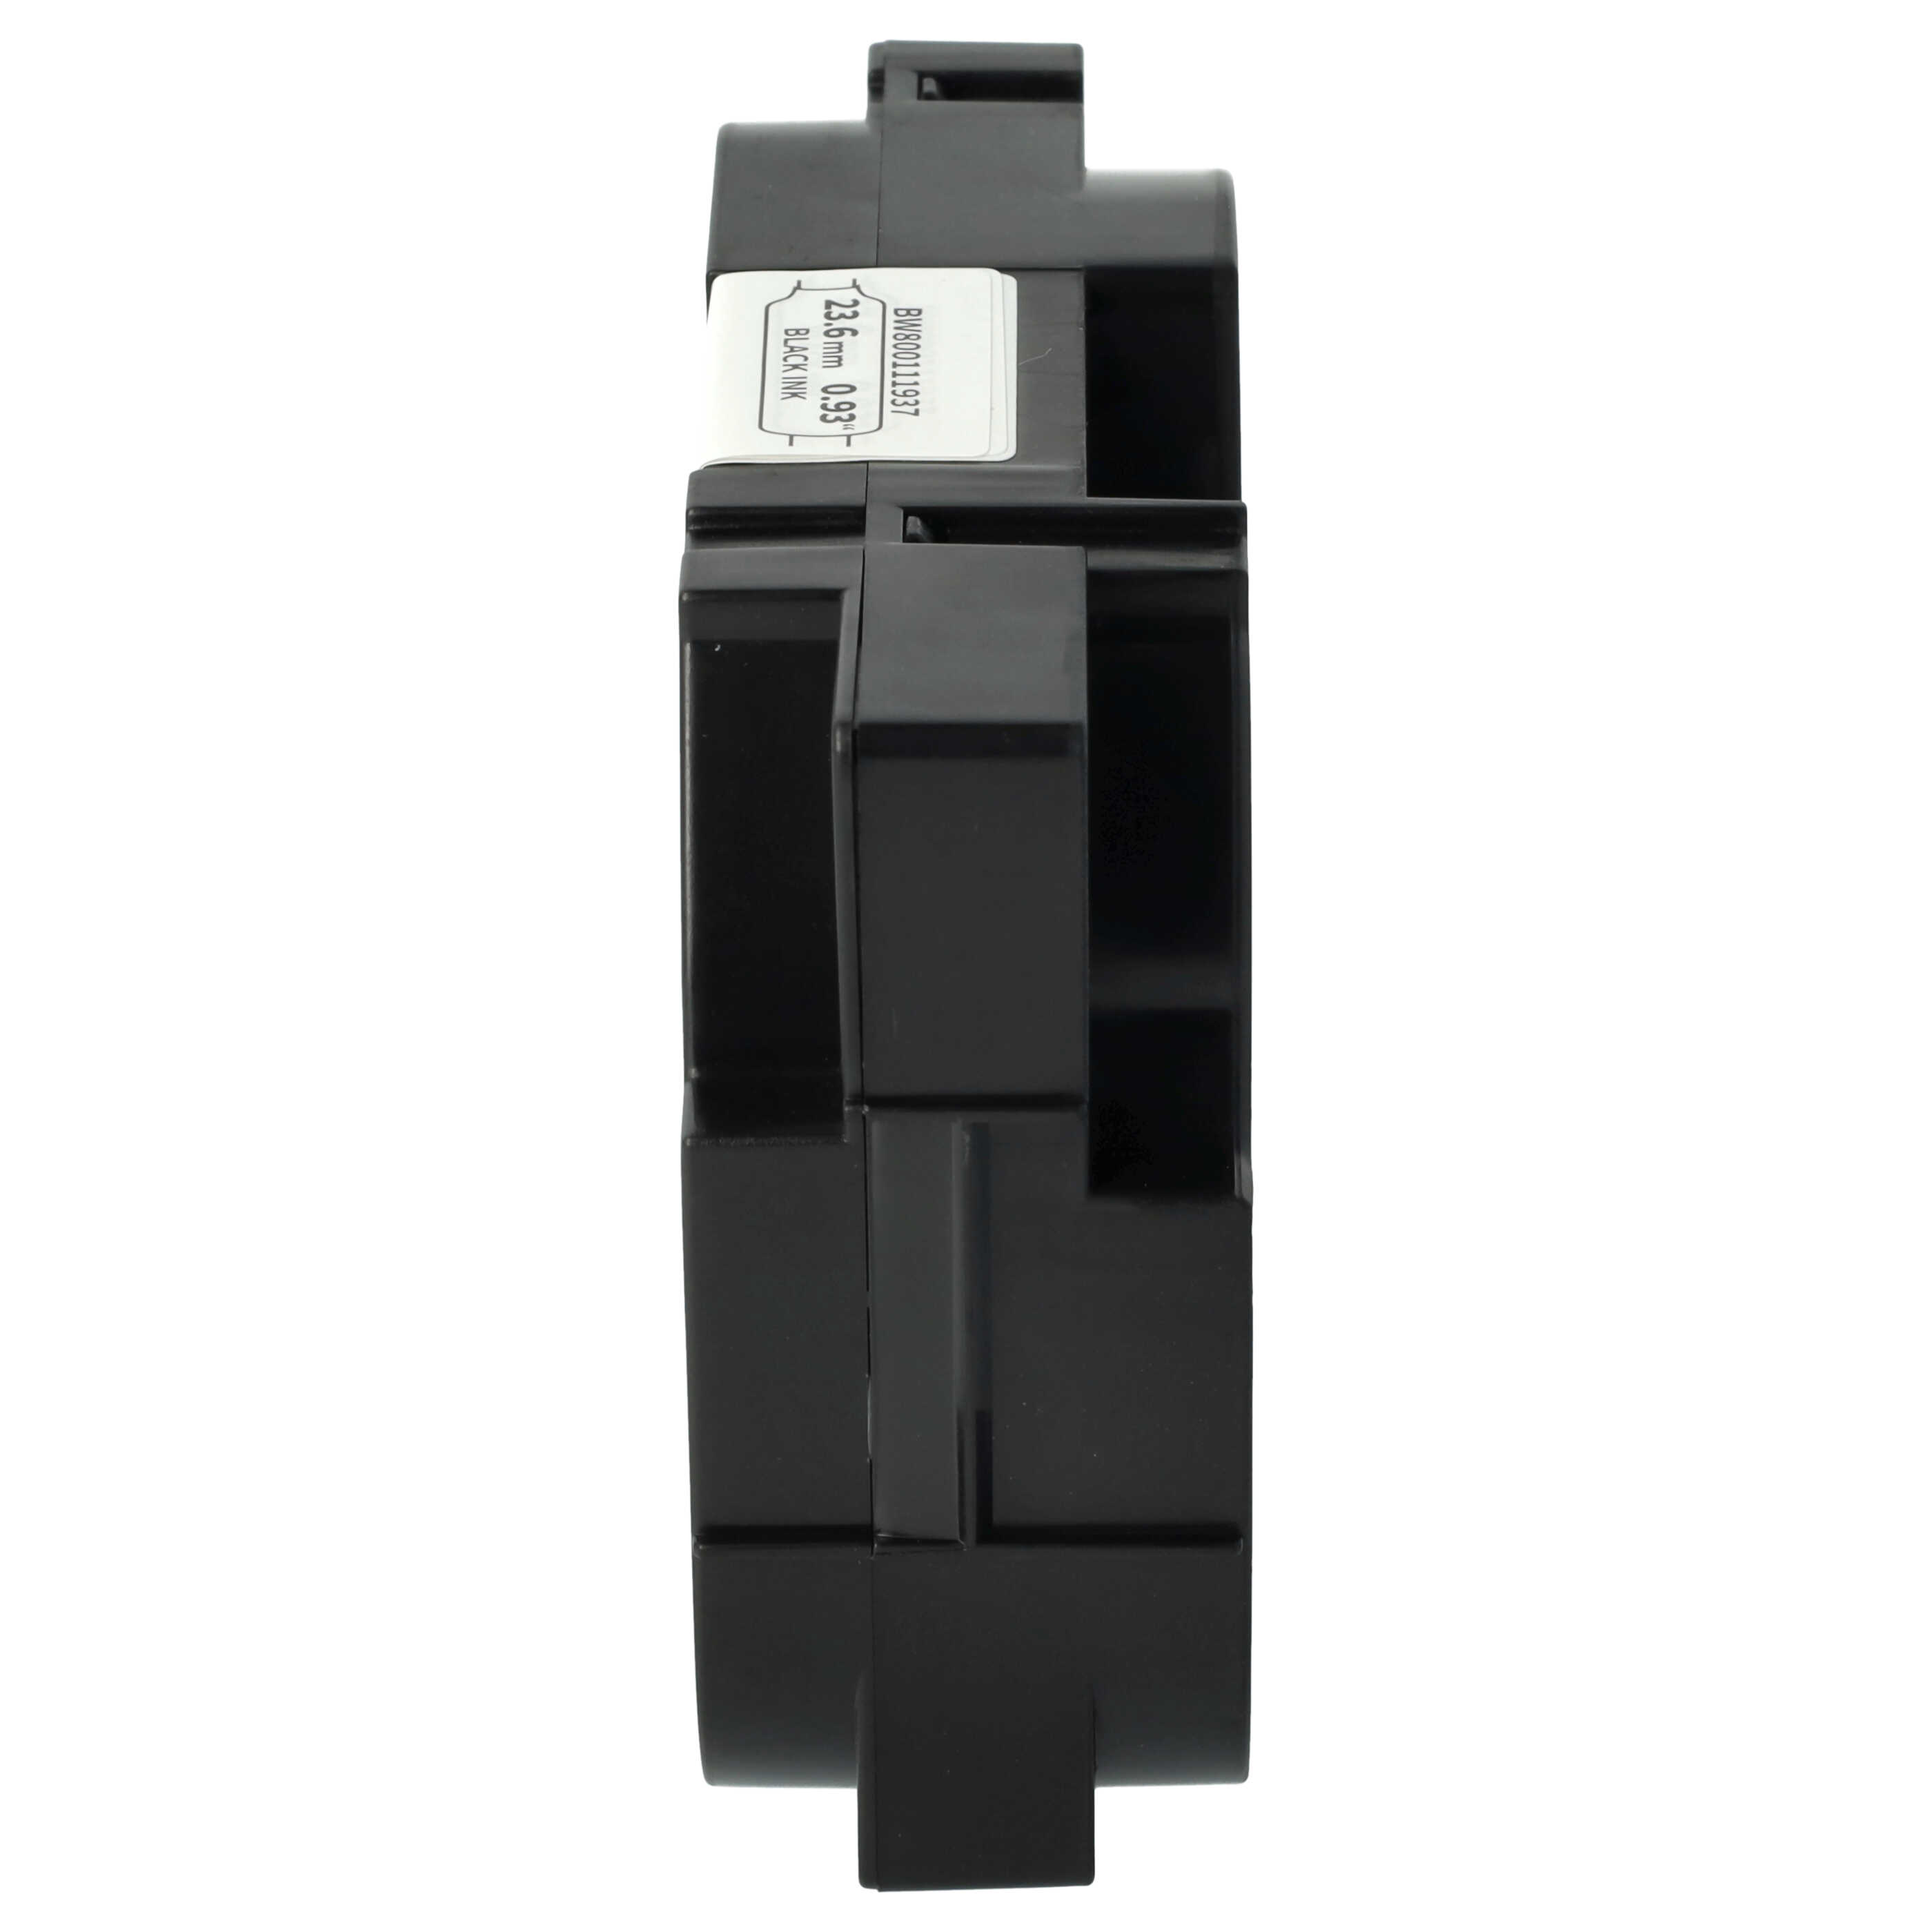 Label Tape as Replacement for Brother HSE-251 - 23.6 mm Black to White, Heat Shrink Tape, 23.6 mm